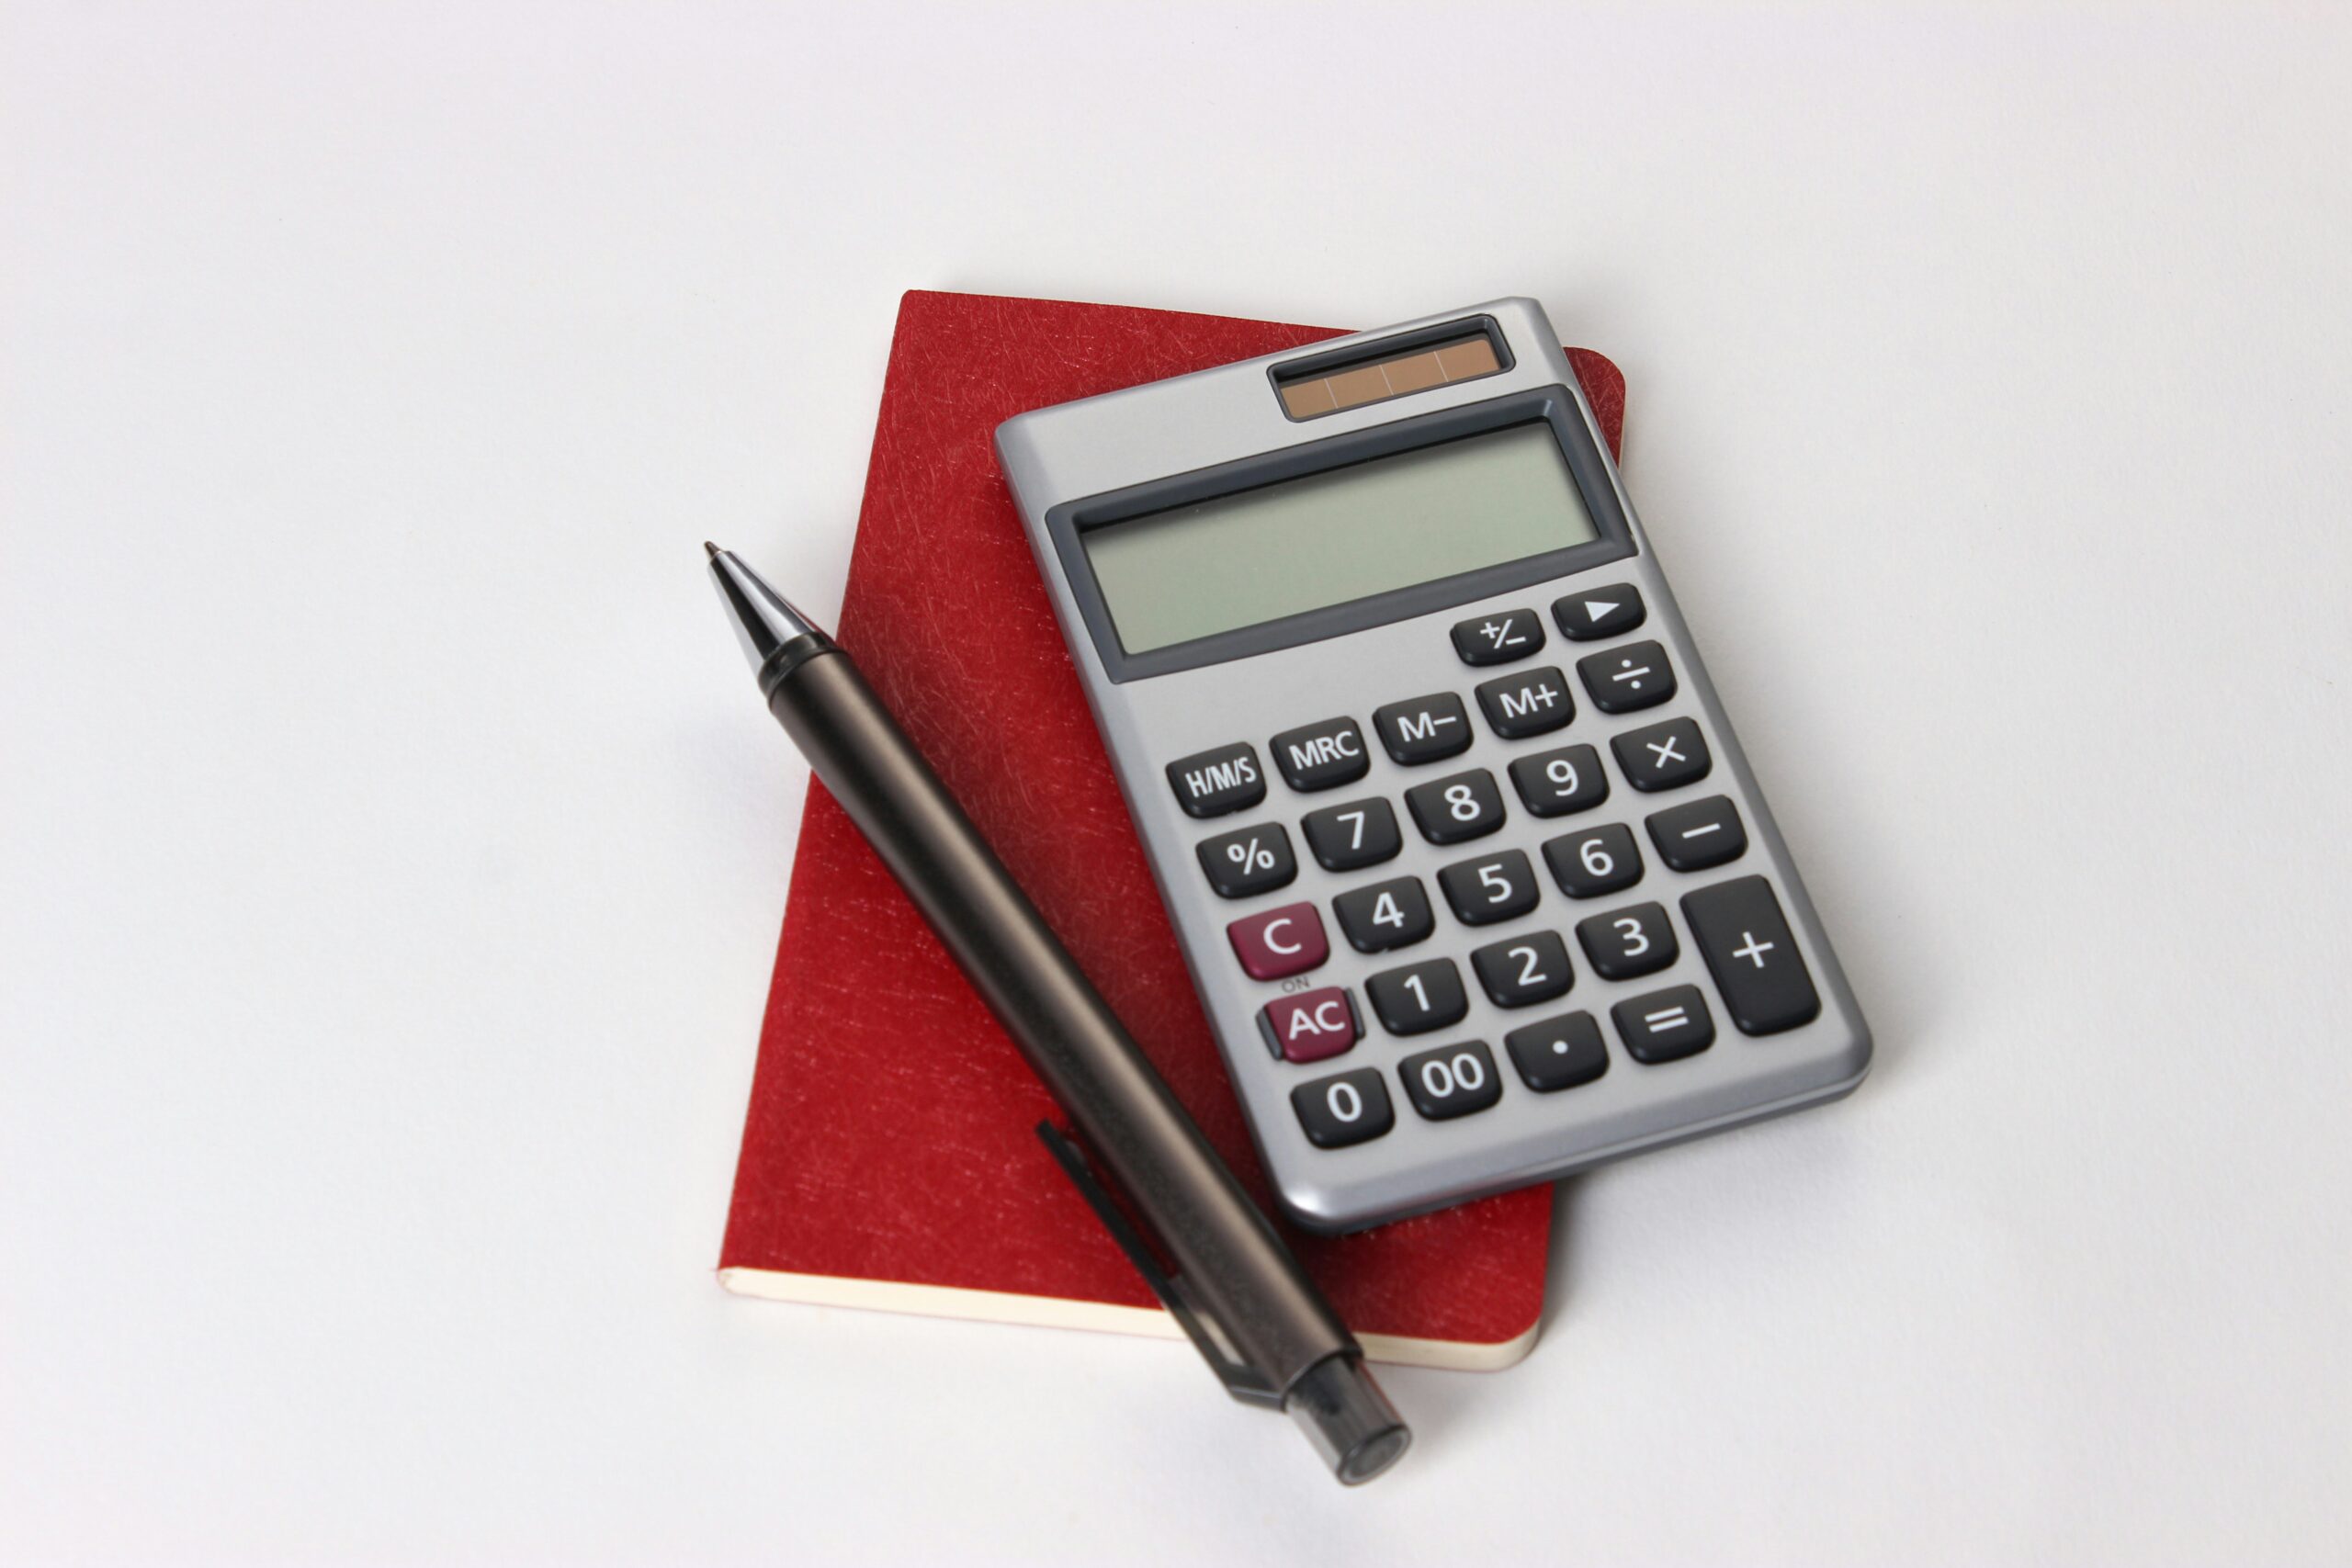 A simple arrangement of a calculator, a black pen, and a small red notebook placed on a clean white surface. The scene suggests a minimalistic and organized setup for basic calculations and note-taking.